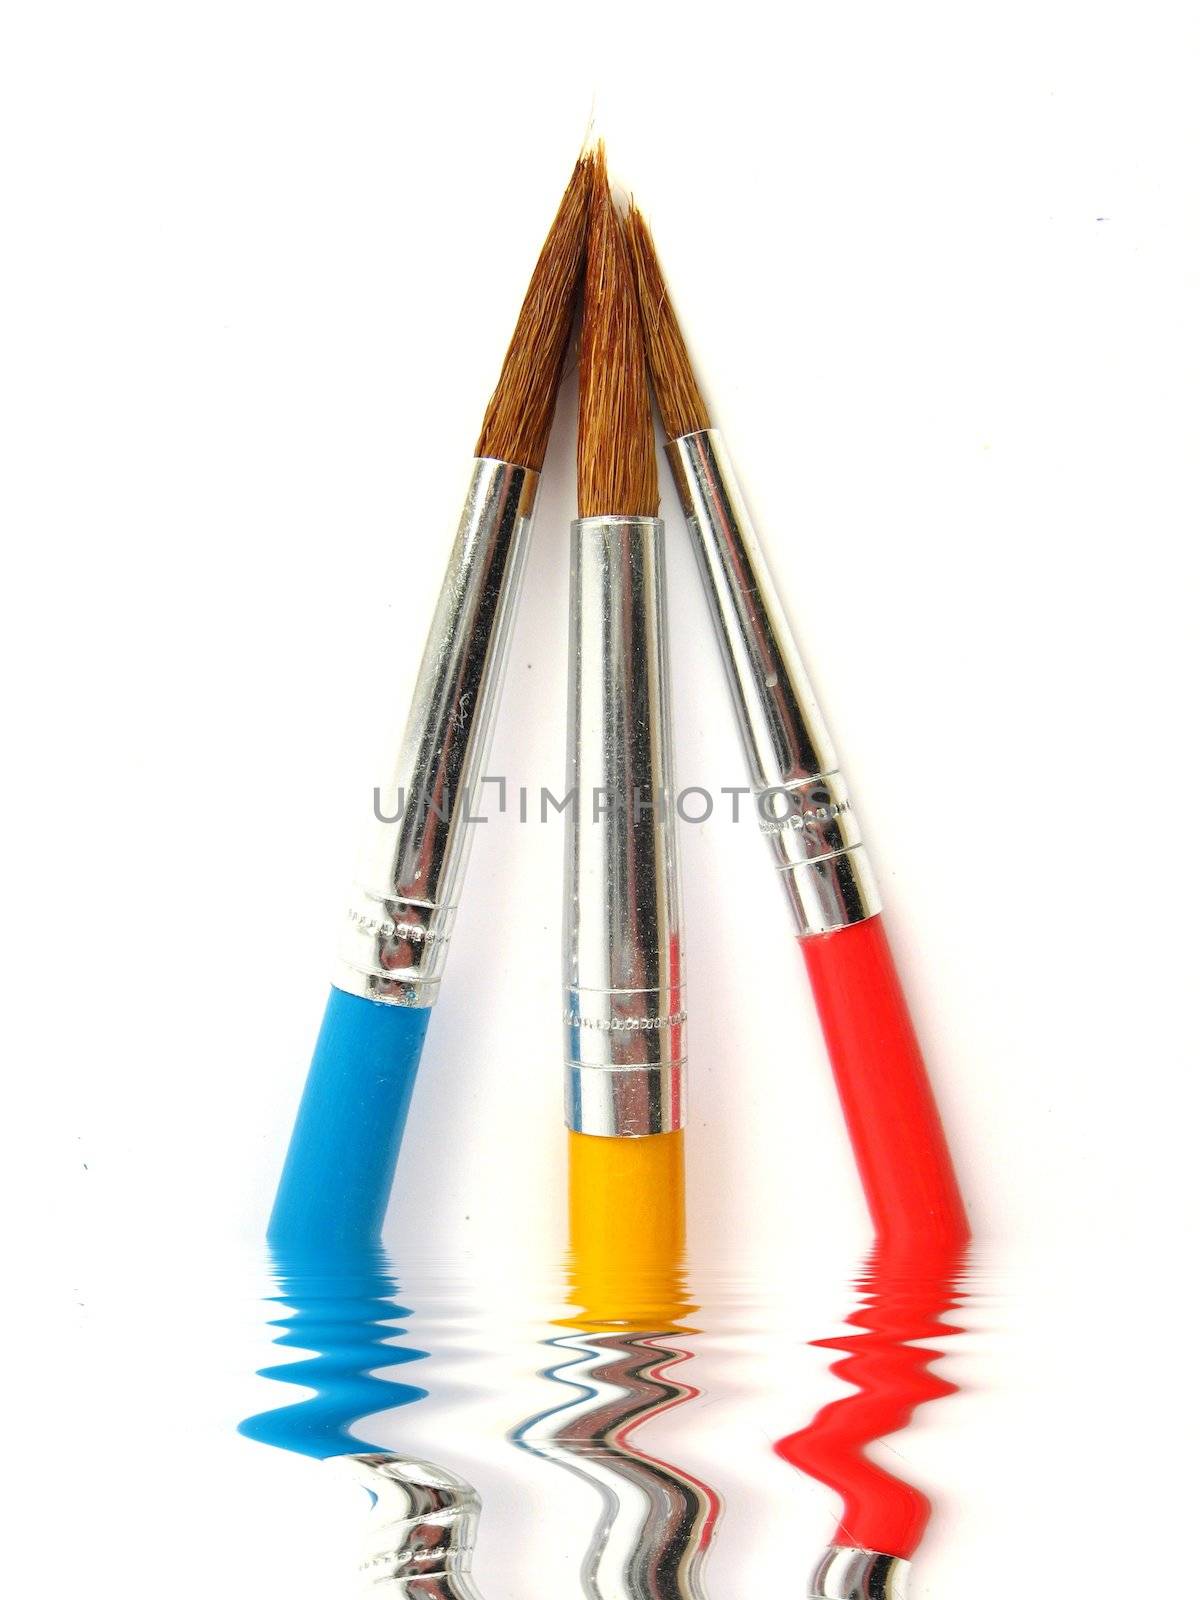 some colored paintbrushes over a white background